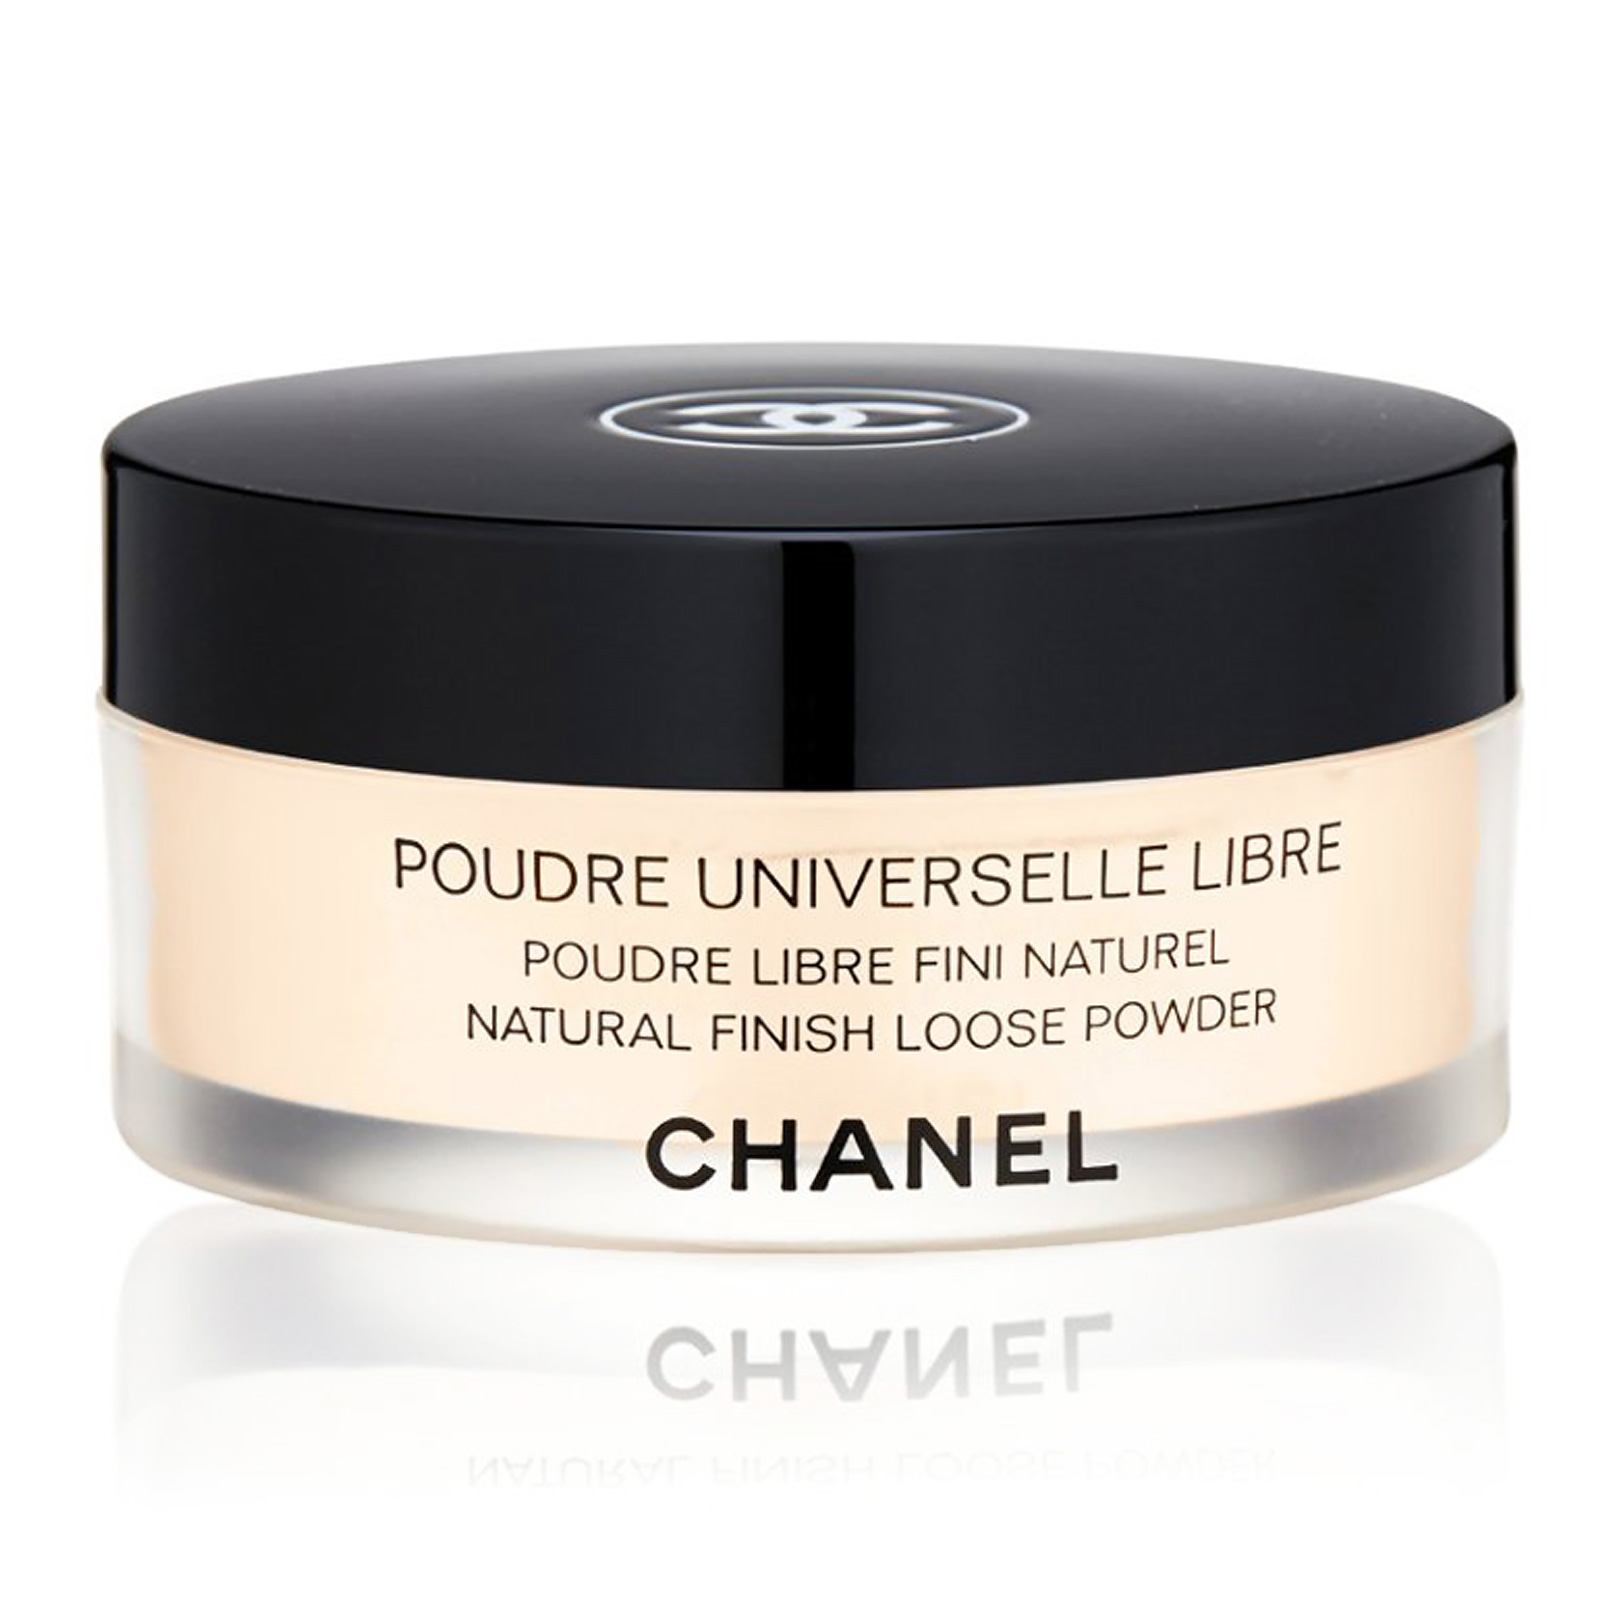 How I set my foundation, Chanel Natural Finish Loose Powder 130 Beige  Lumière